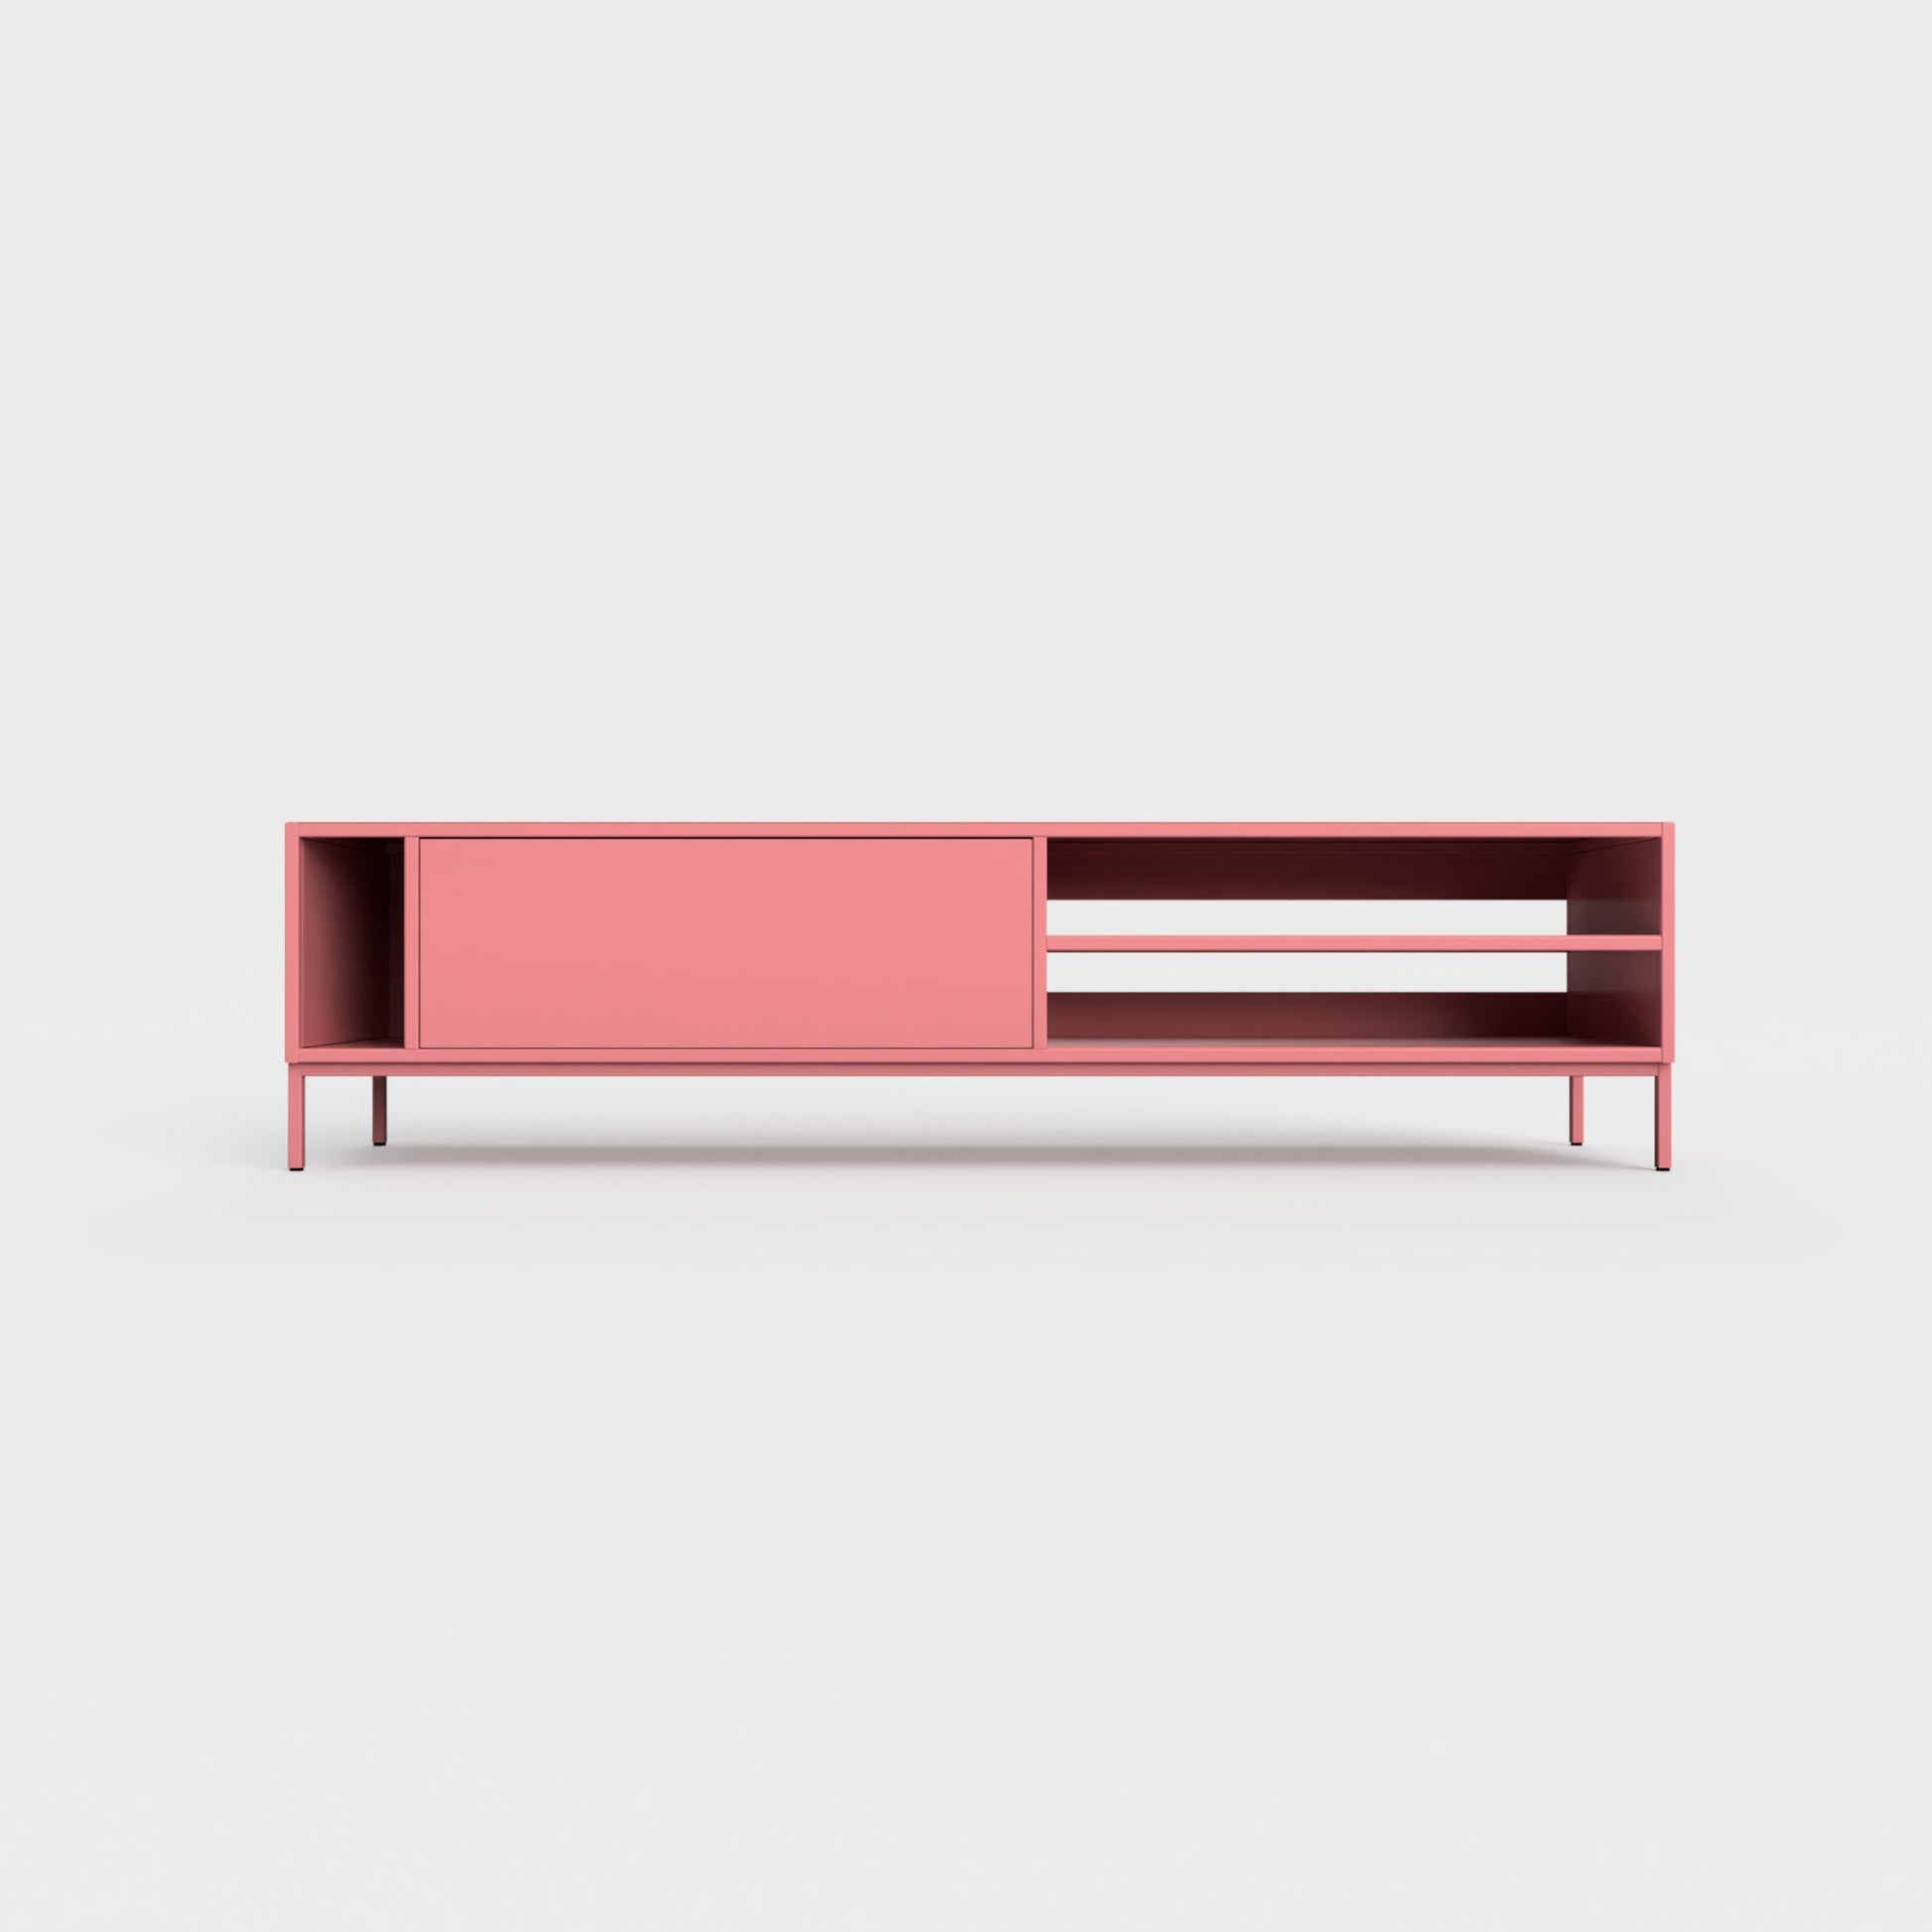 Prunus 03 Lowboard in pink rose color, powder-coated steel, elegant and modern piece of furniture for your living room